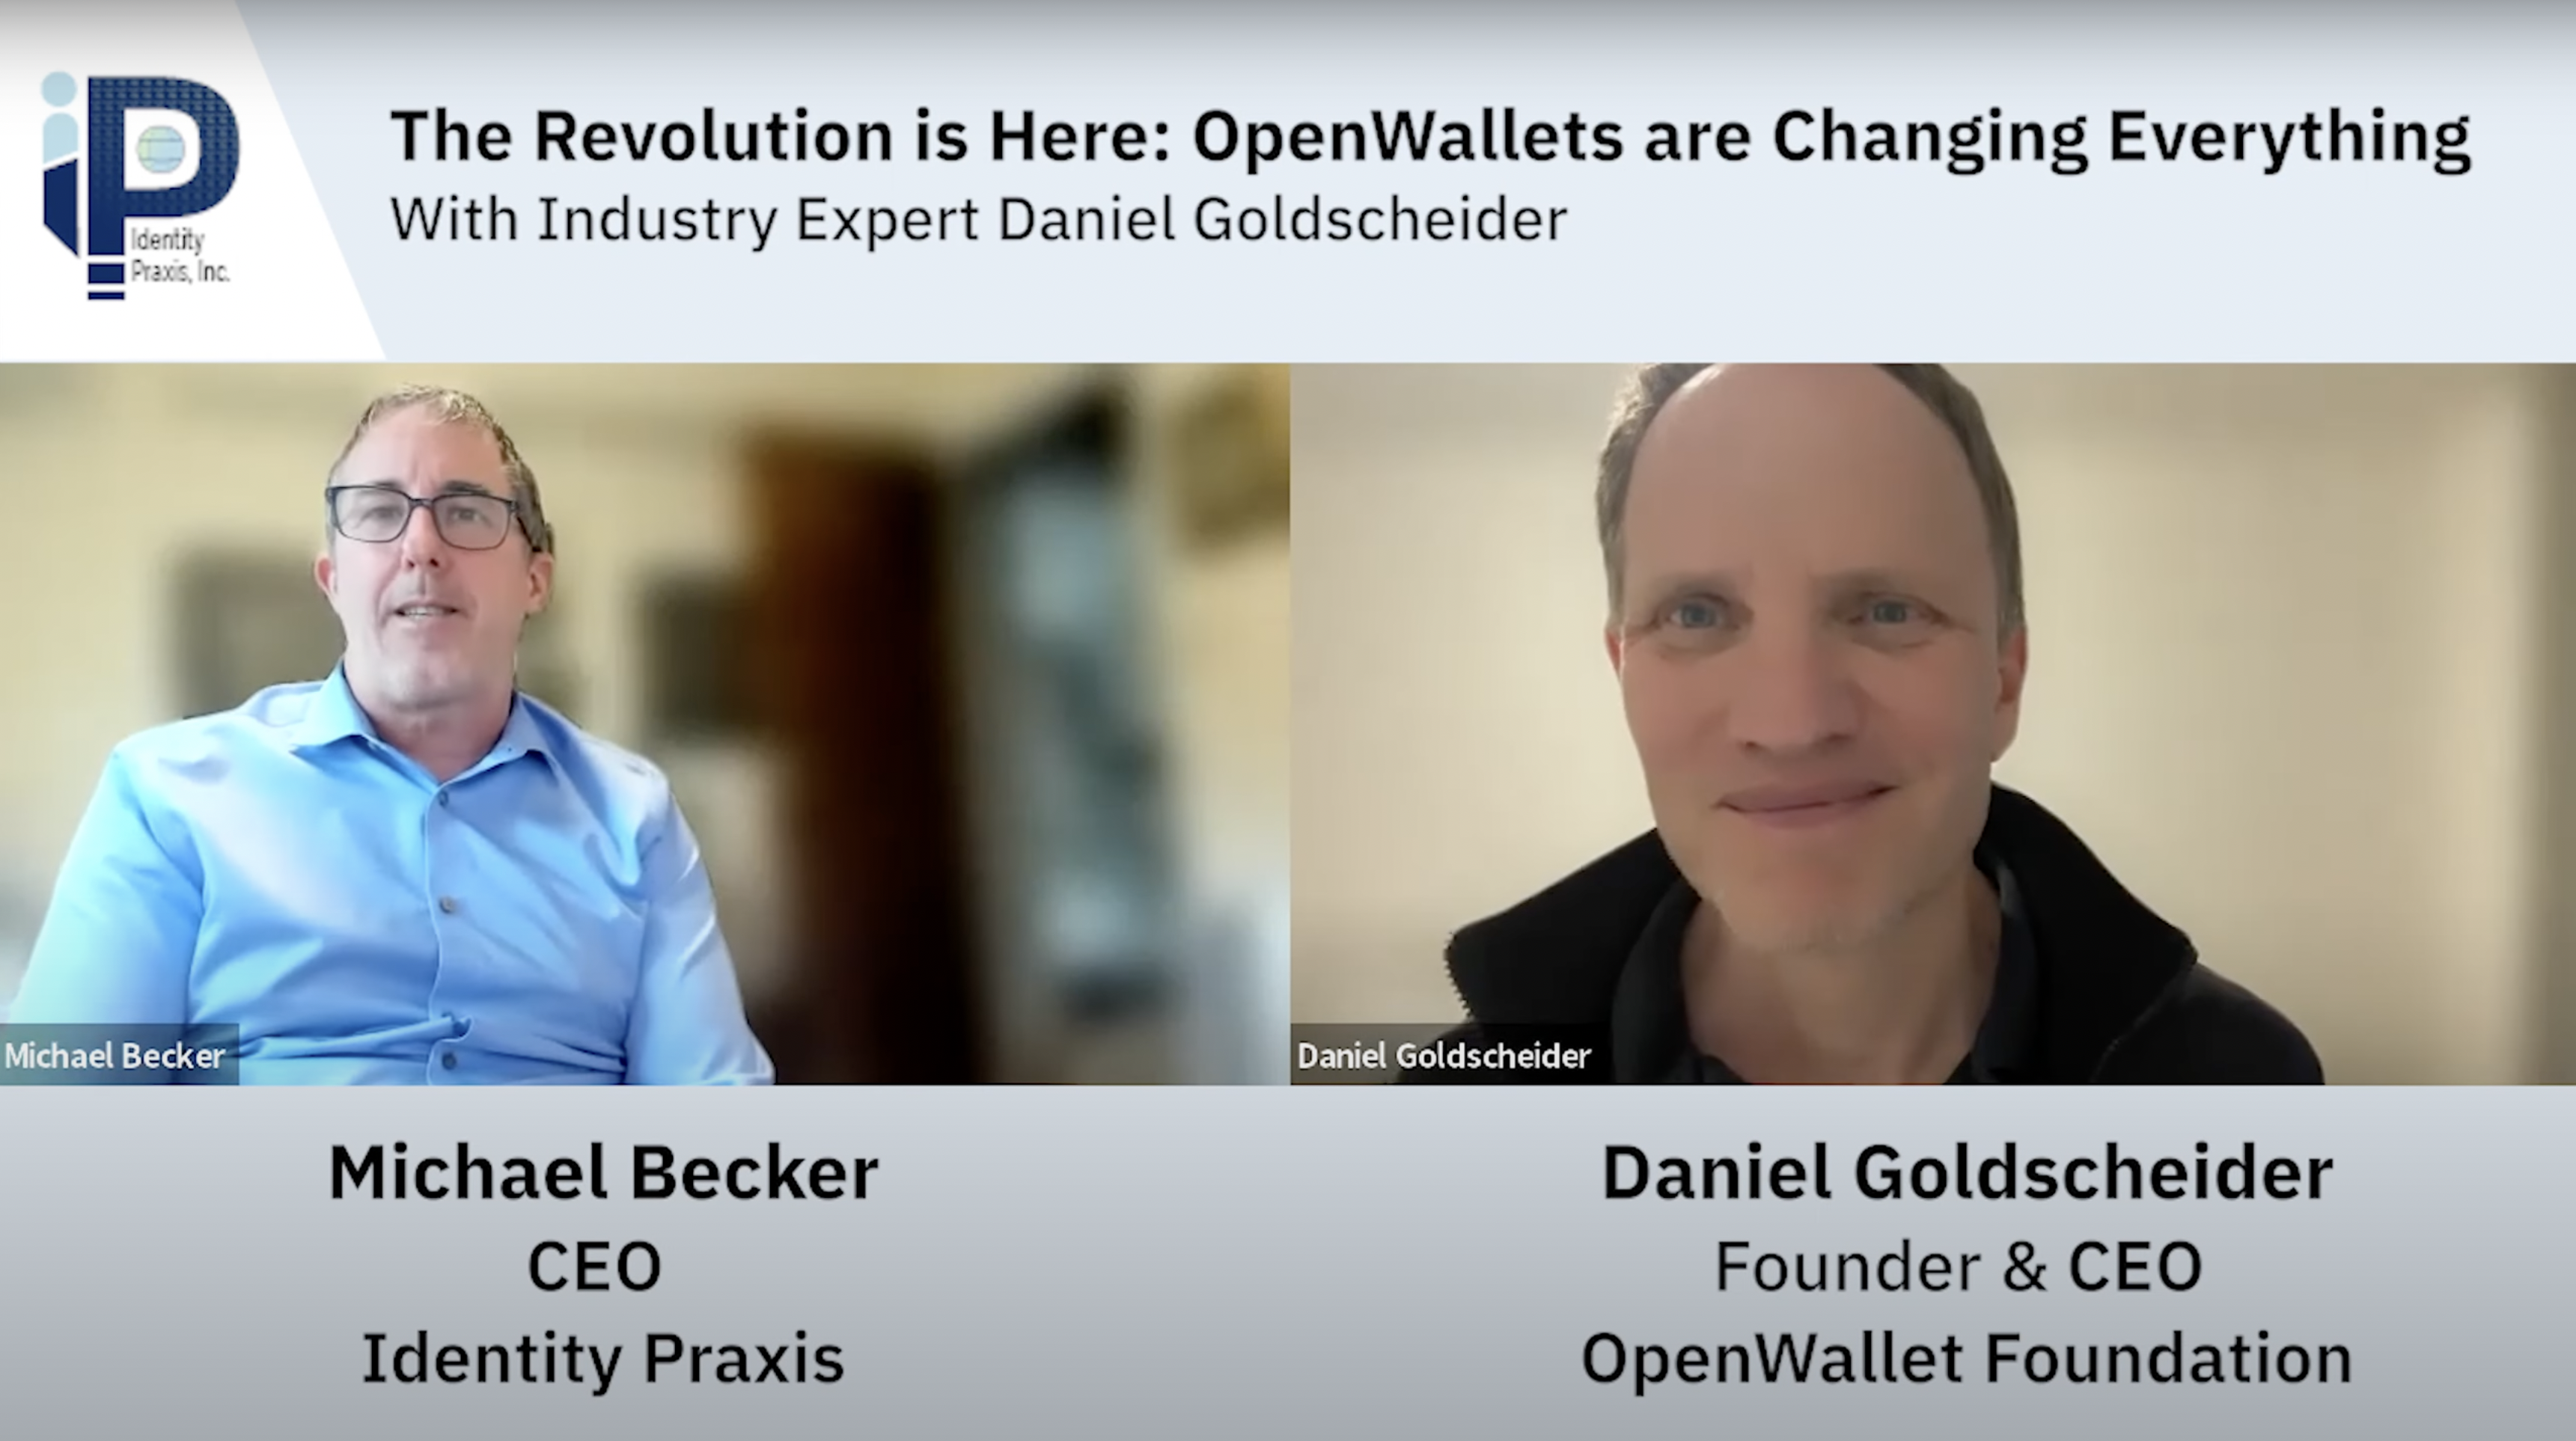 The Revolution is Here: An Interview With Daniel Goldscheider, Founder of the OpenWallet Foundation